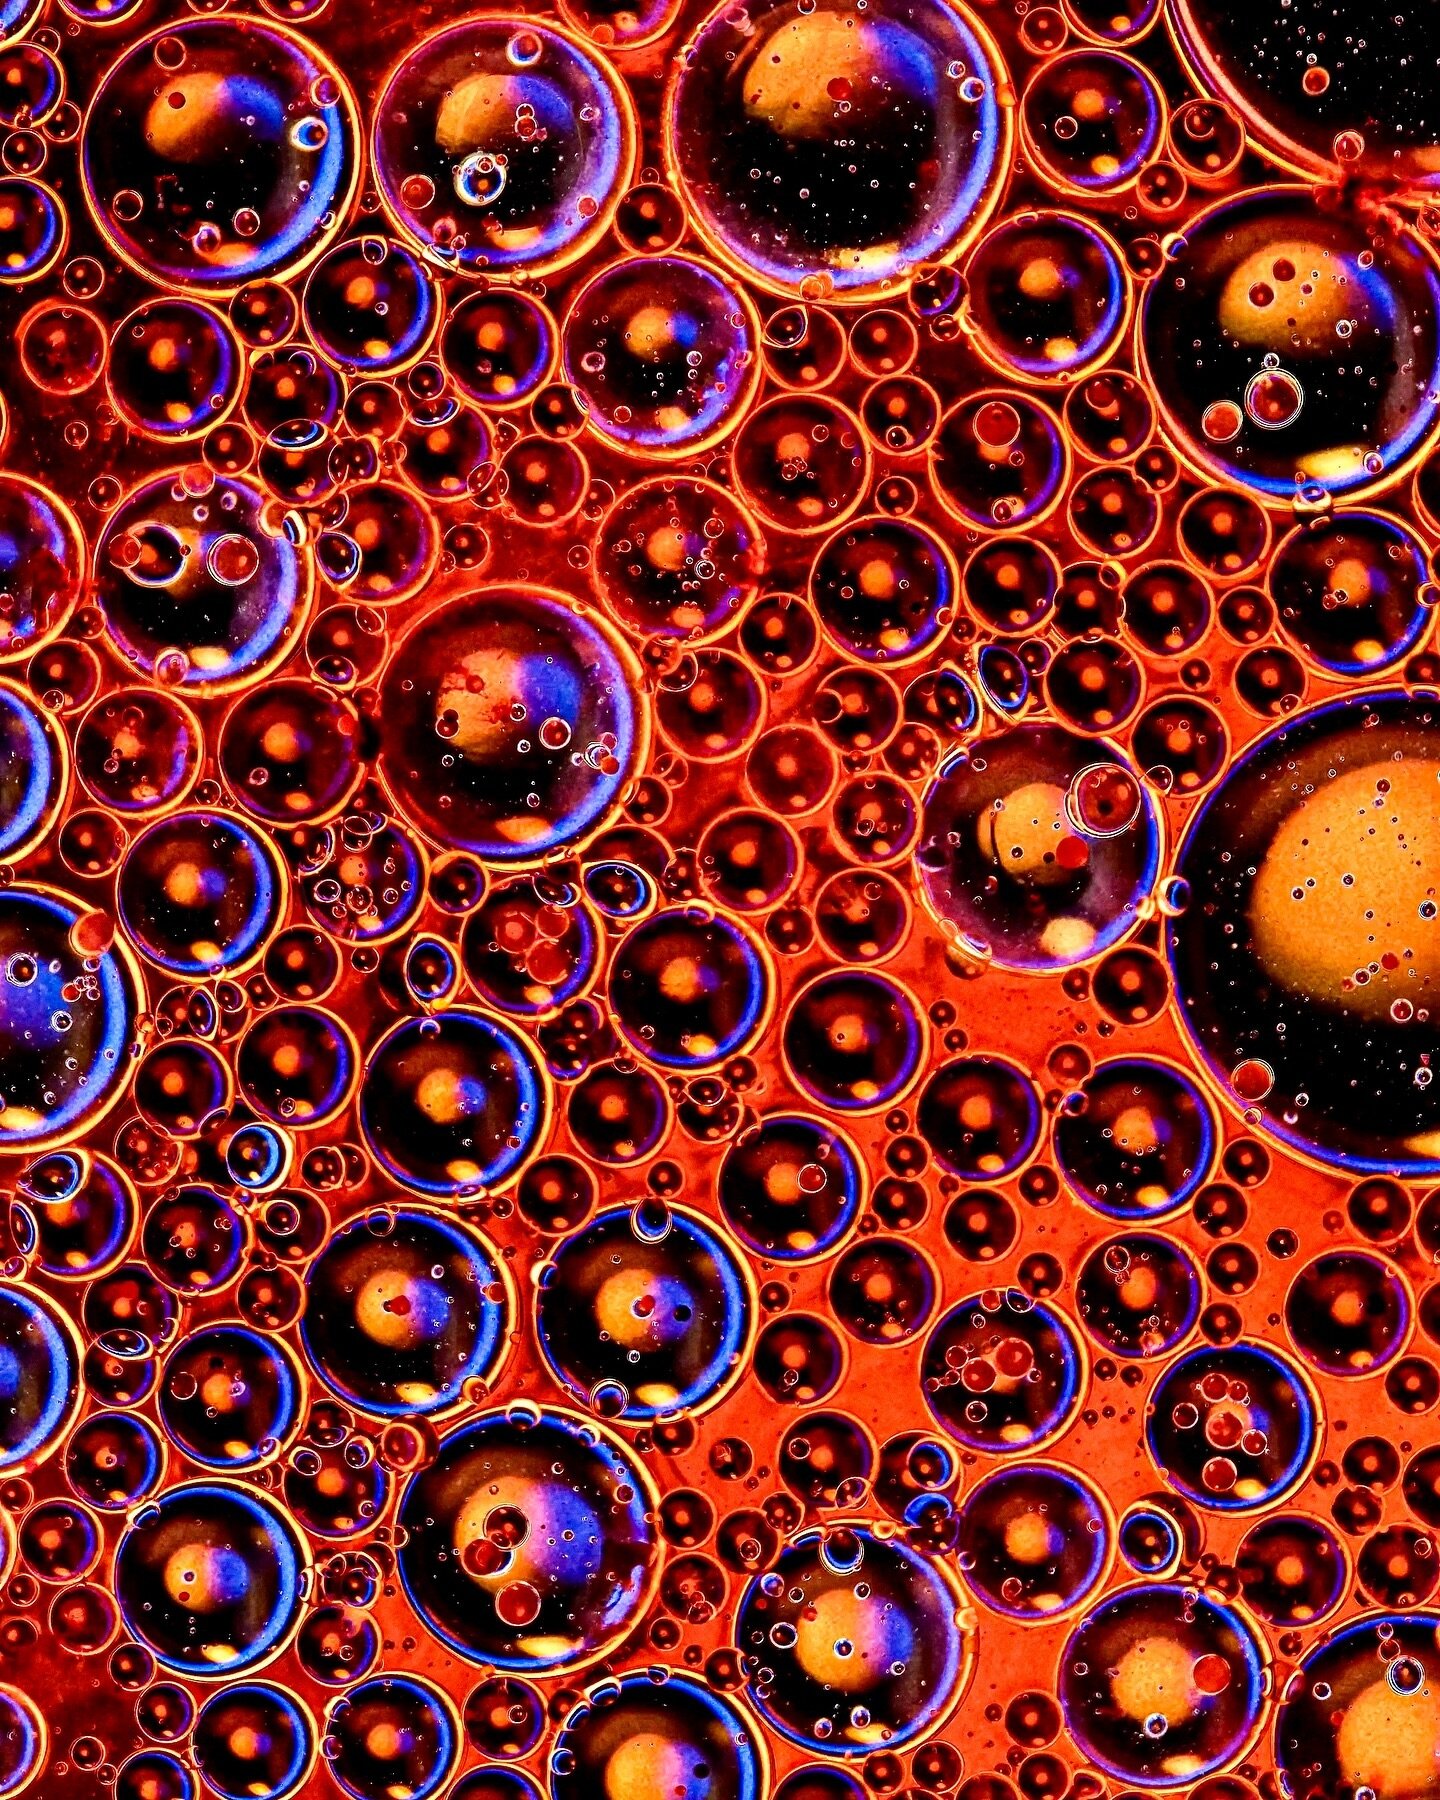 Bubblism 🫧 No CGI, just some bubbles on a microscope slide 🛝 A still frame from my latest music video for Dreamers Delight - Observer. Full video available in my videography (l!nk in b!o) - check it out! 
#bubbles #fluidart #liquidart #videoart #vi